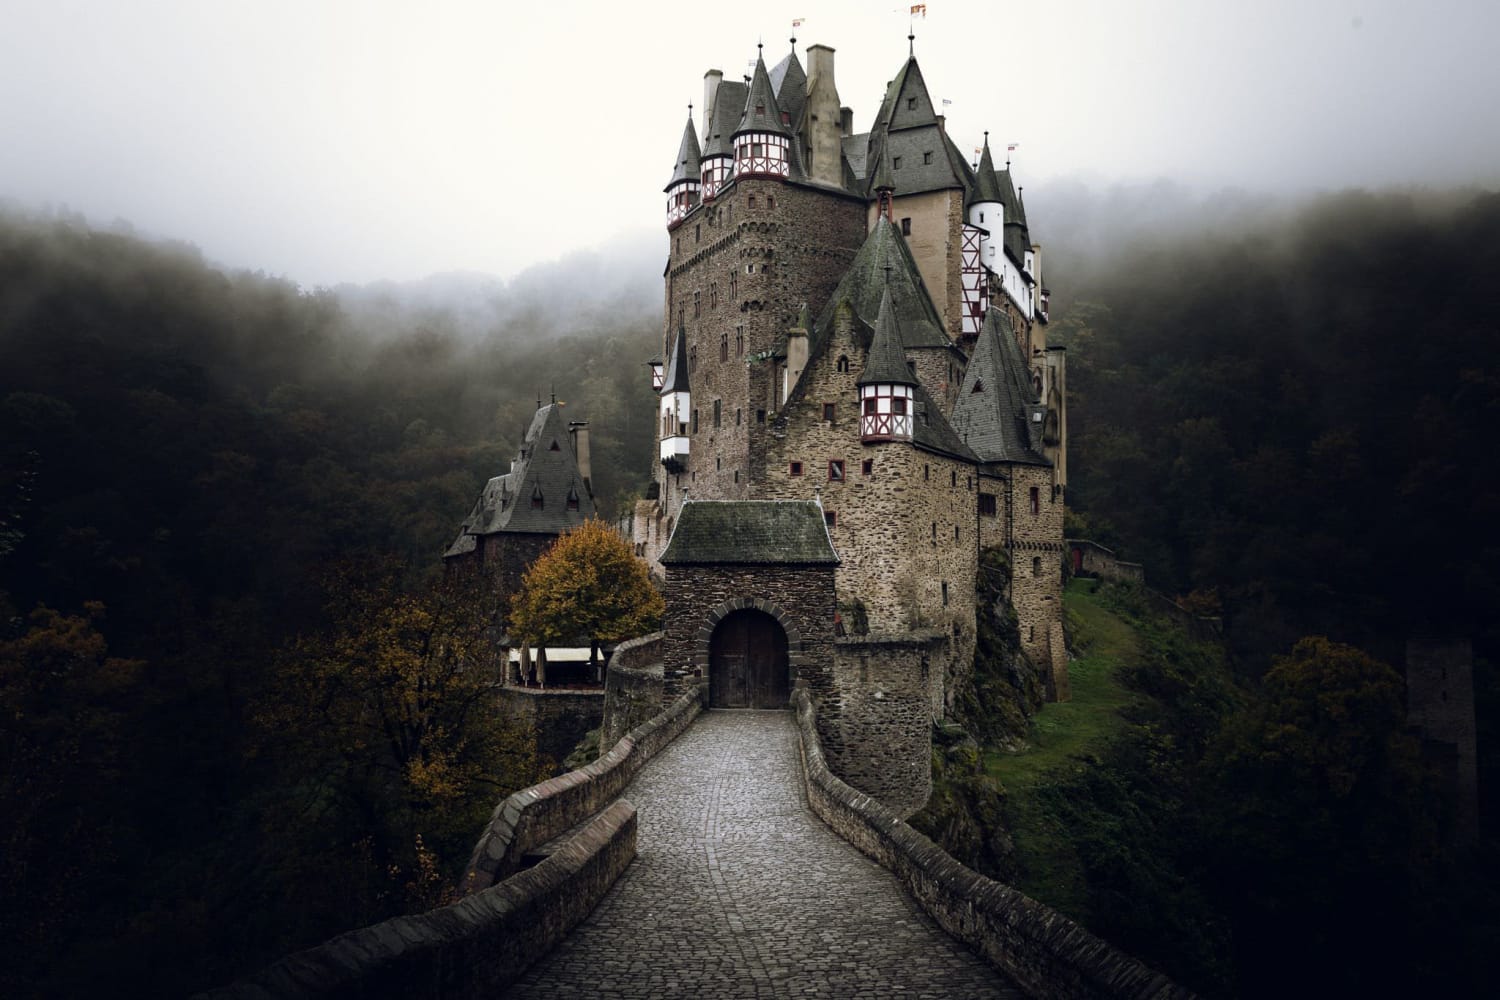 One family, 33 generations, have owned and occupied this medieval castle since the 12th century - the Eltz family. Eltz Castle - Germany.